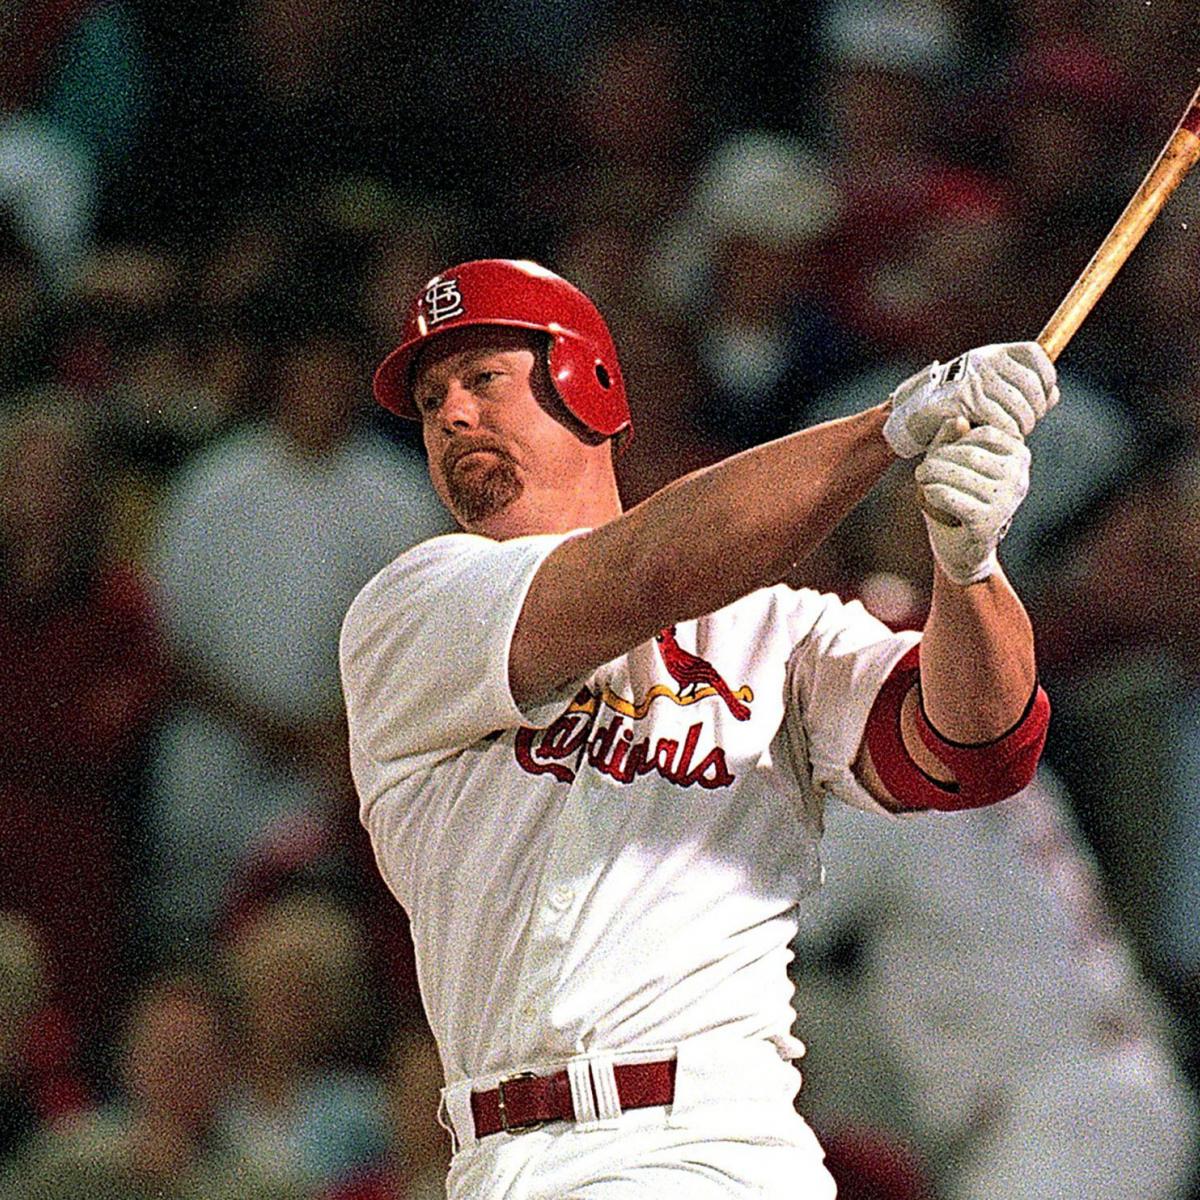 Mark McGwire Made $128,000 For Every Home Run